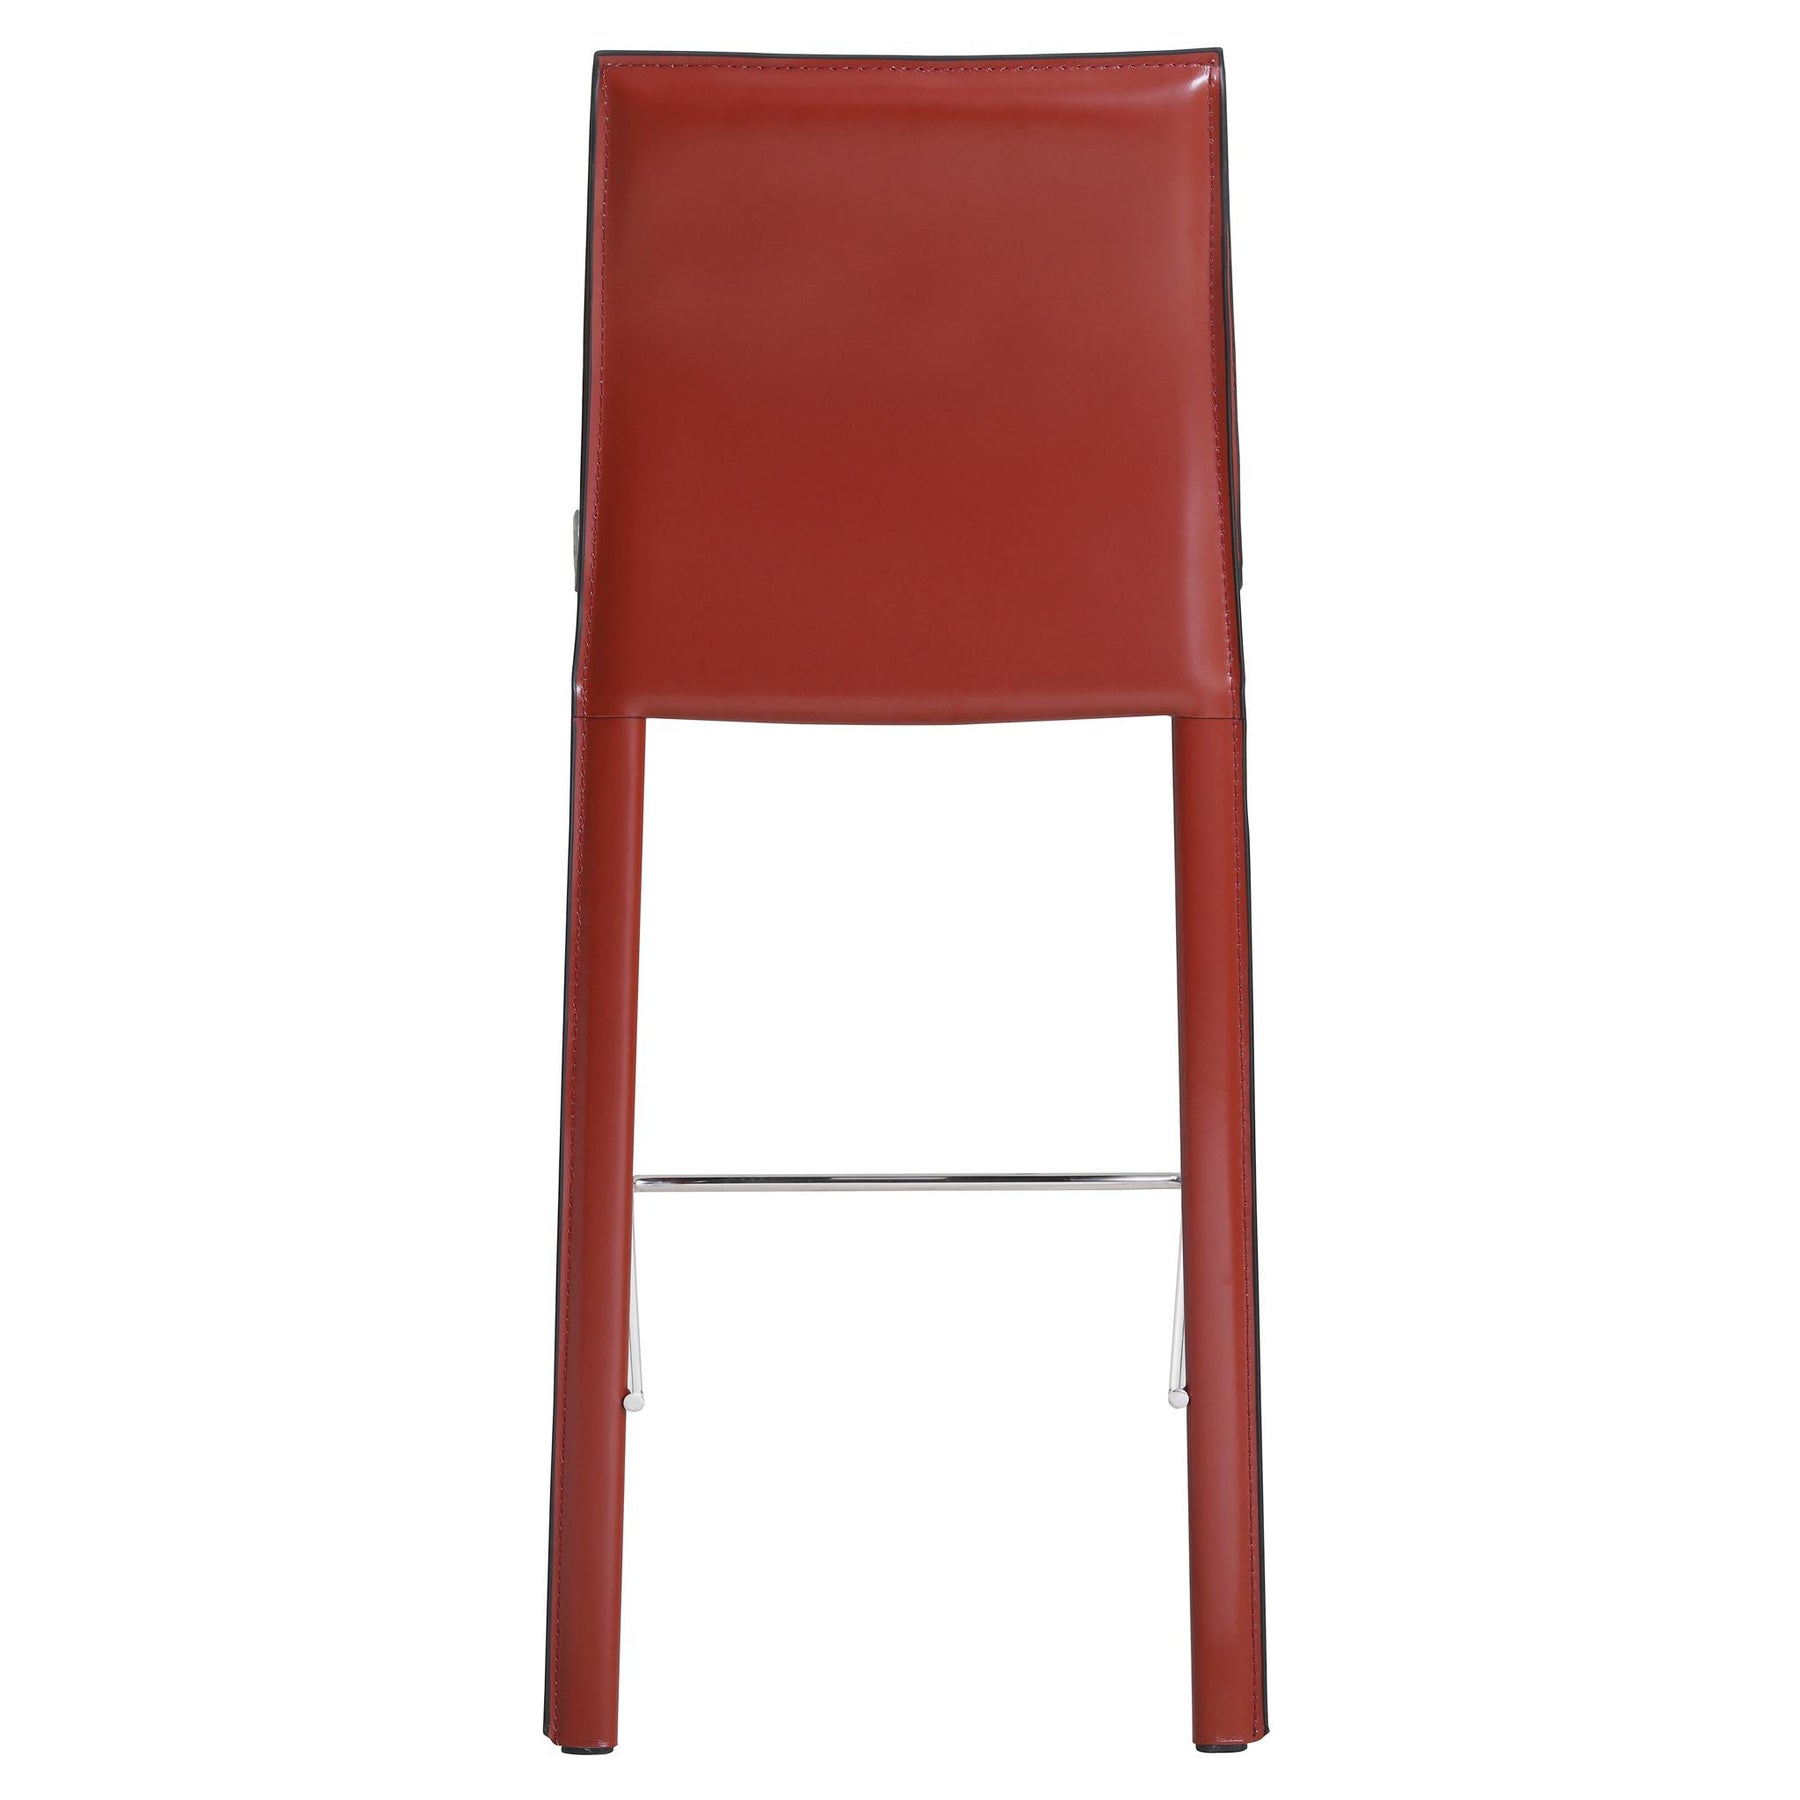 Gervin Recycled Leather Counter Stool (Set of 2) by New Pacific Direct - 448526R